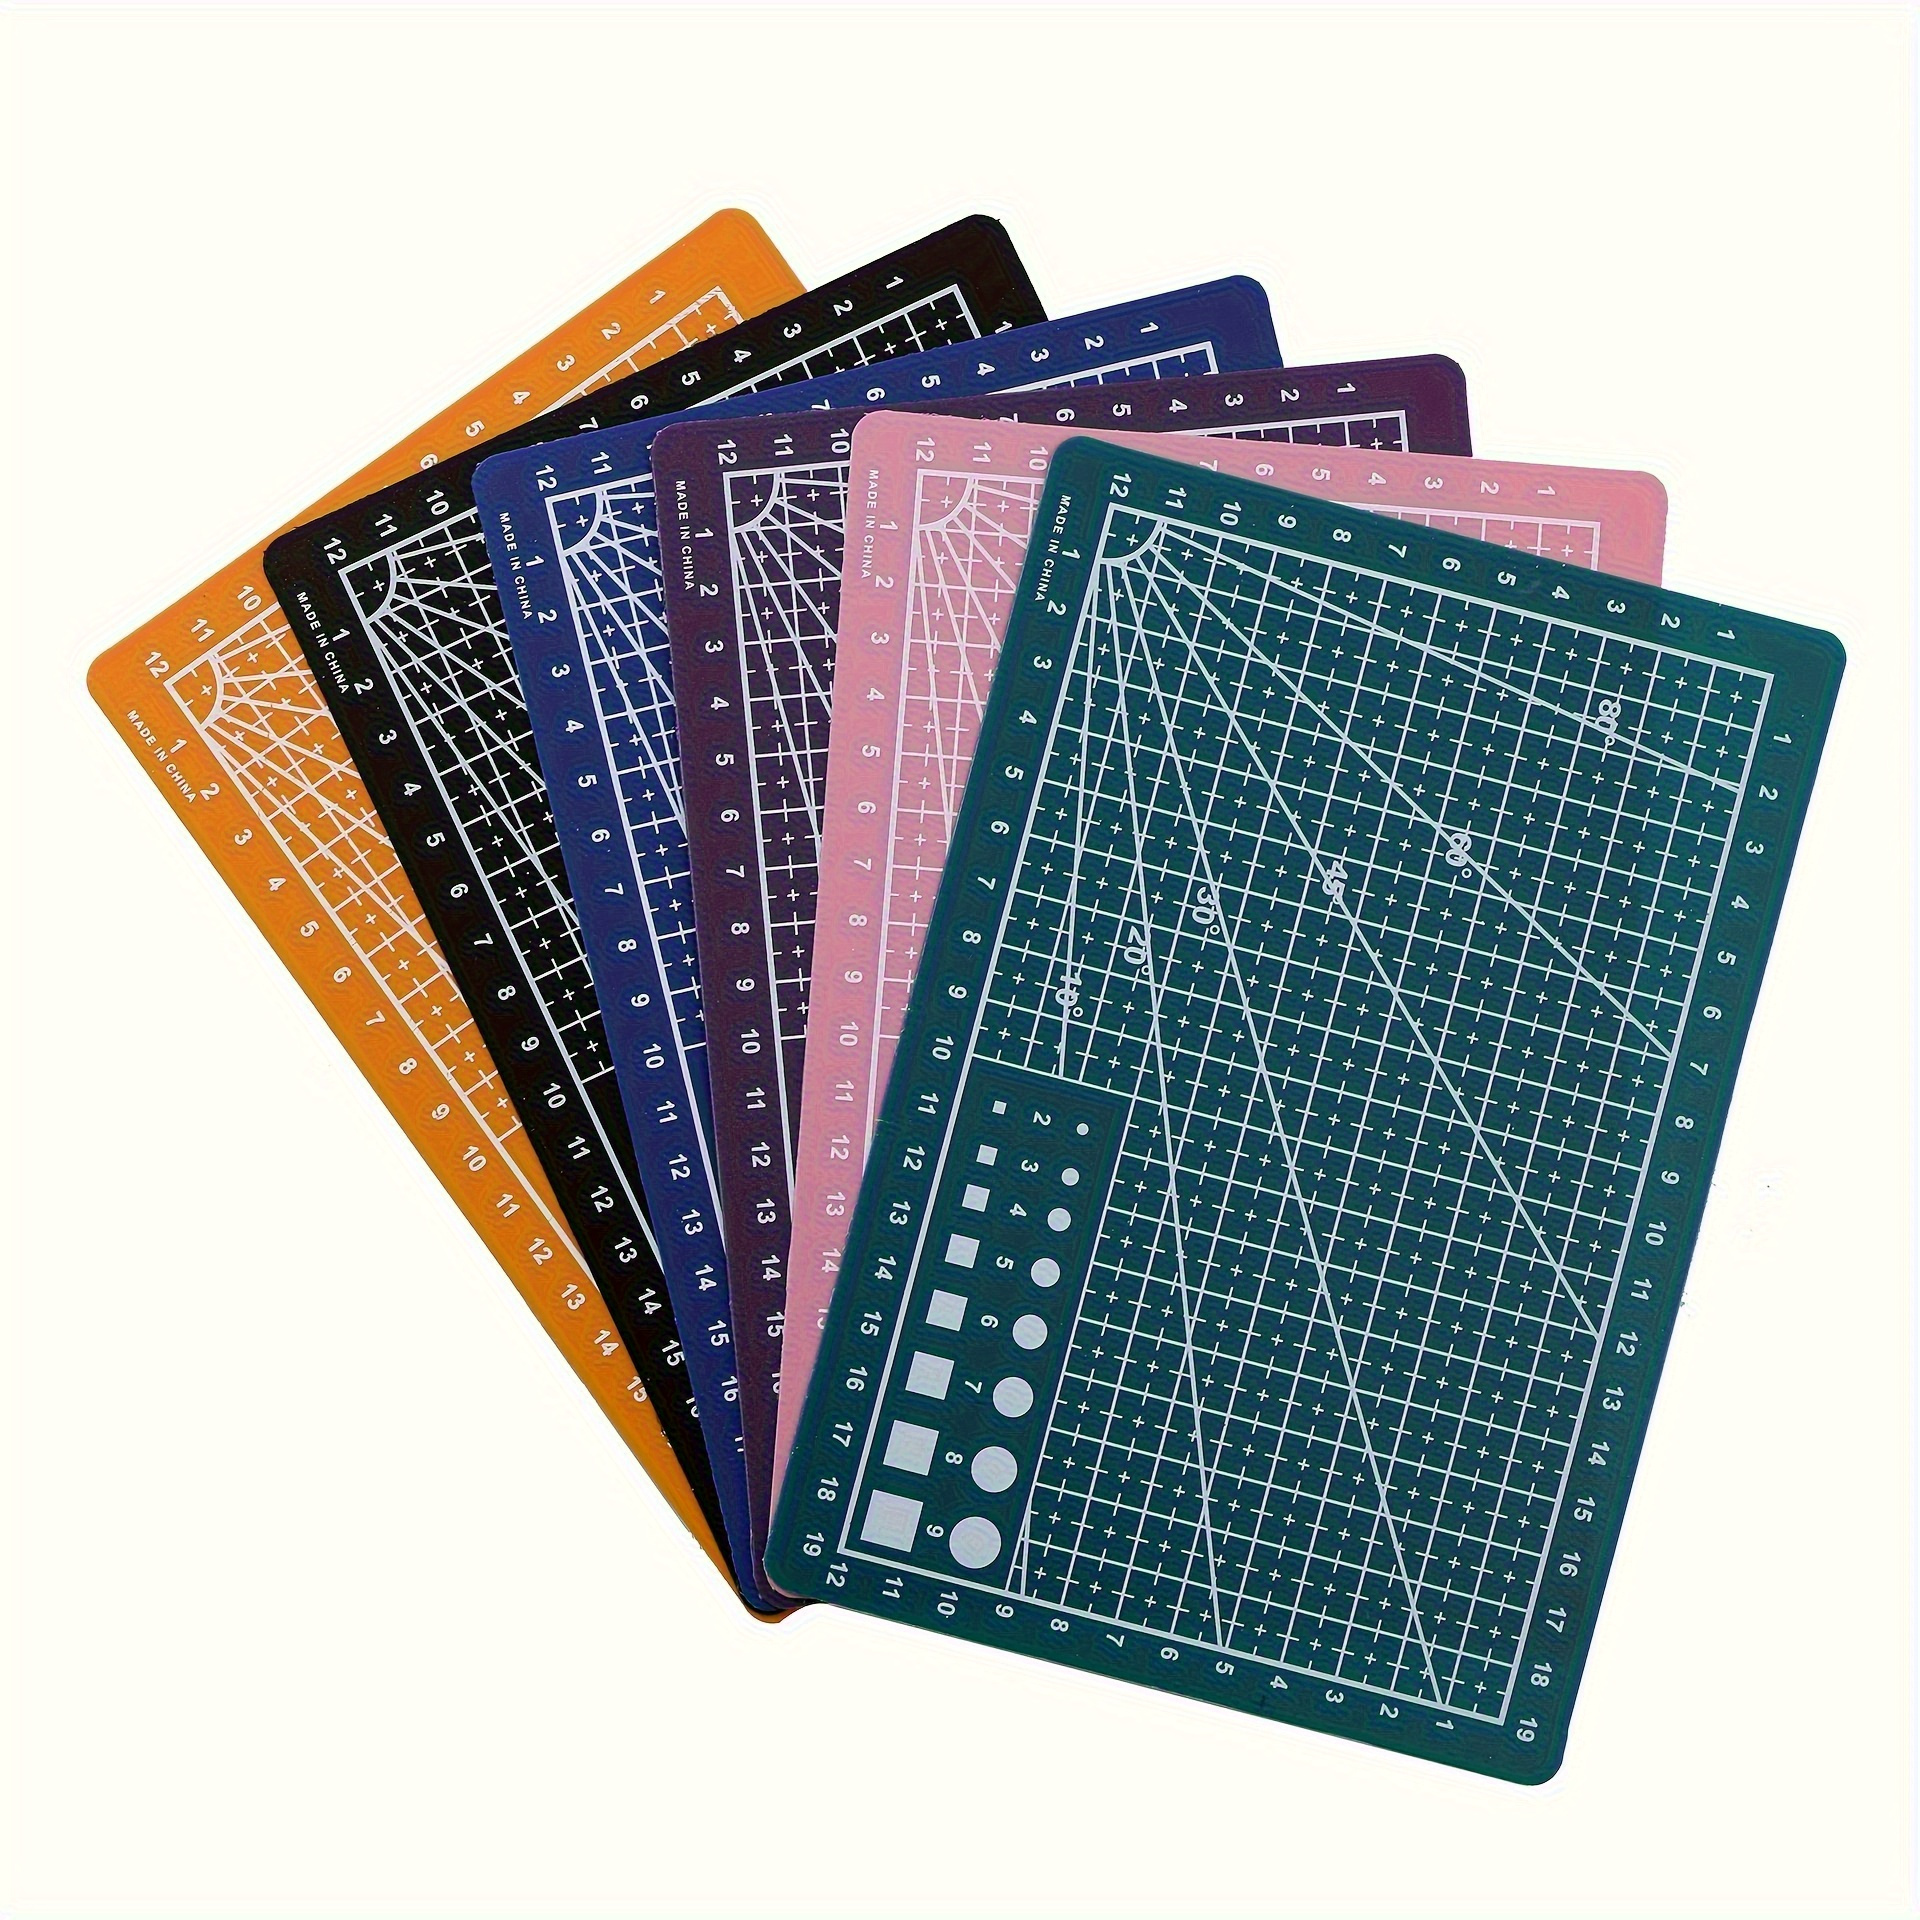 

A3 Double-sided Cutting Mat, 1pc, Plastic Craft Mat For Diy Quilting, Paper Projects, And Art - Durable Grid-lined Craft Pad For Office & School